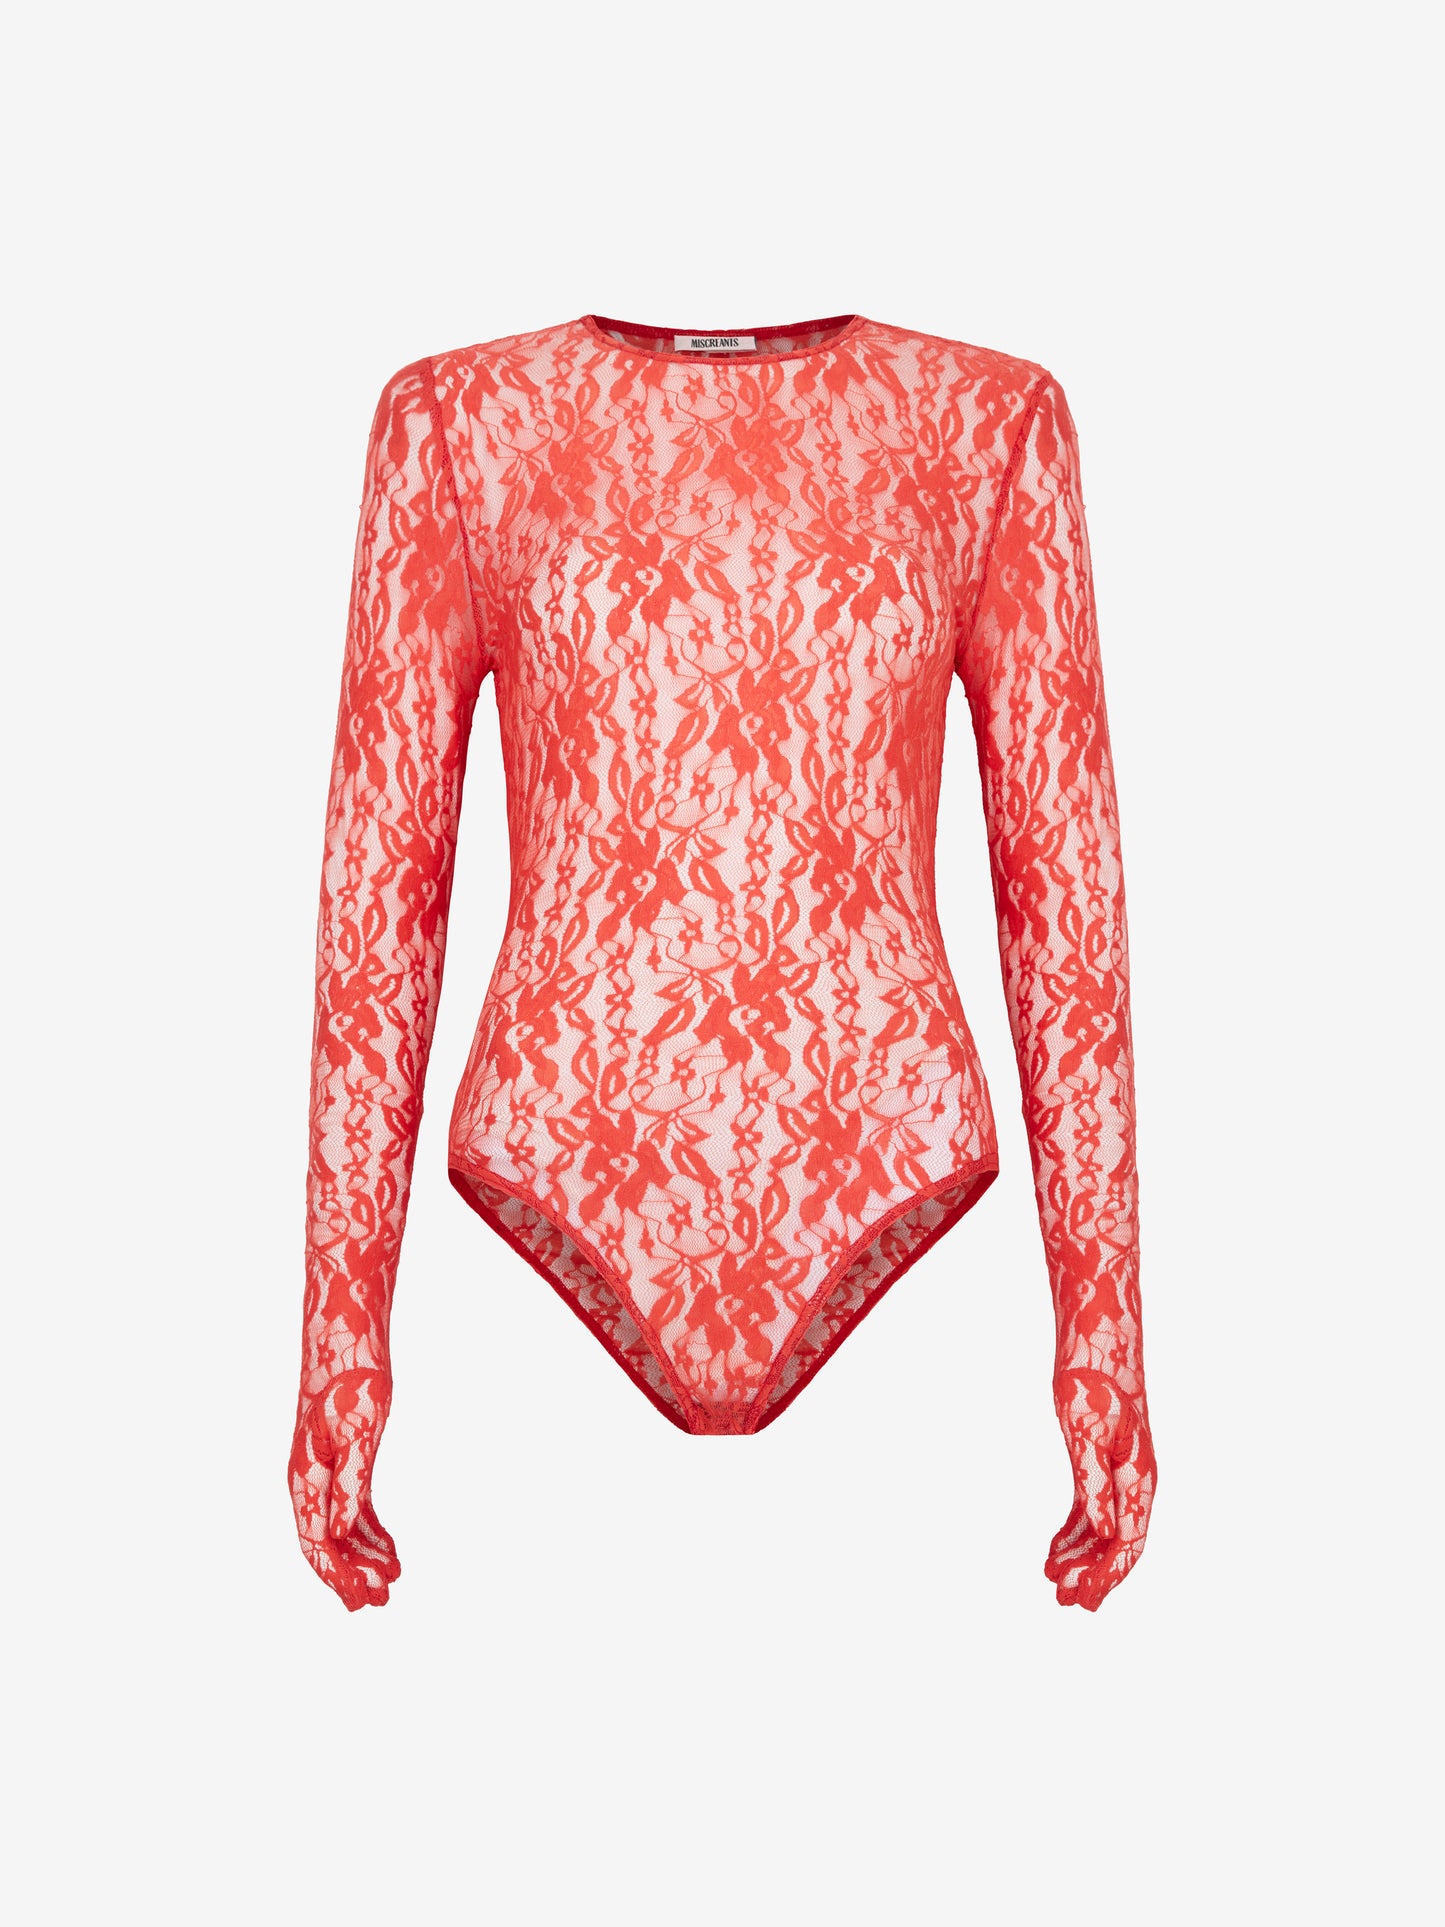 Cleo Body - Red Lace